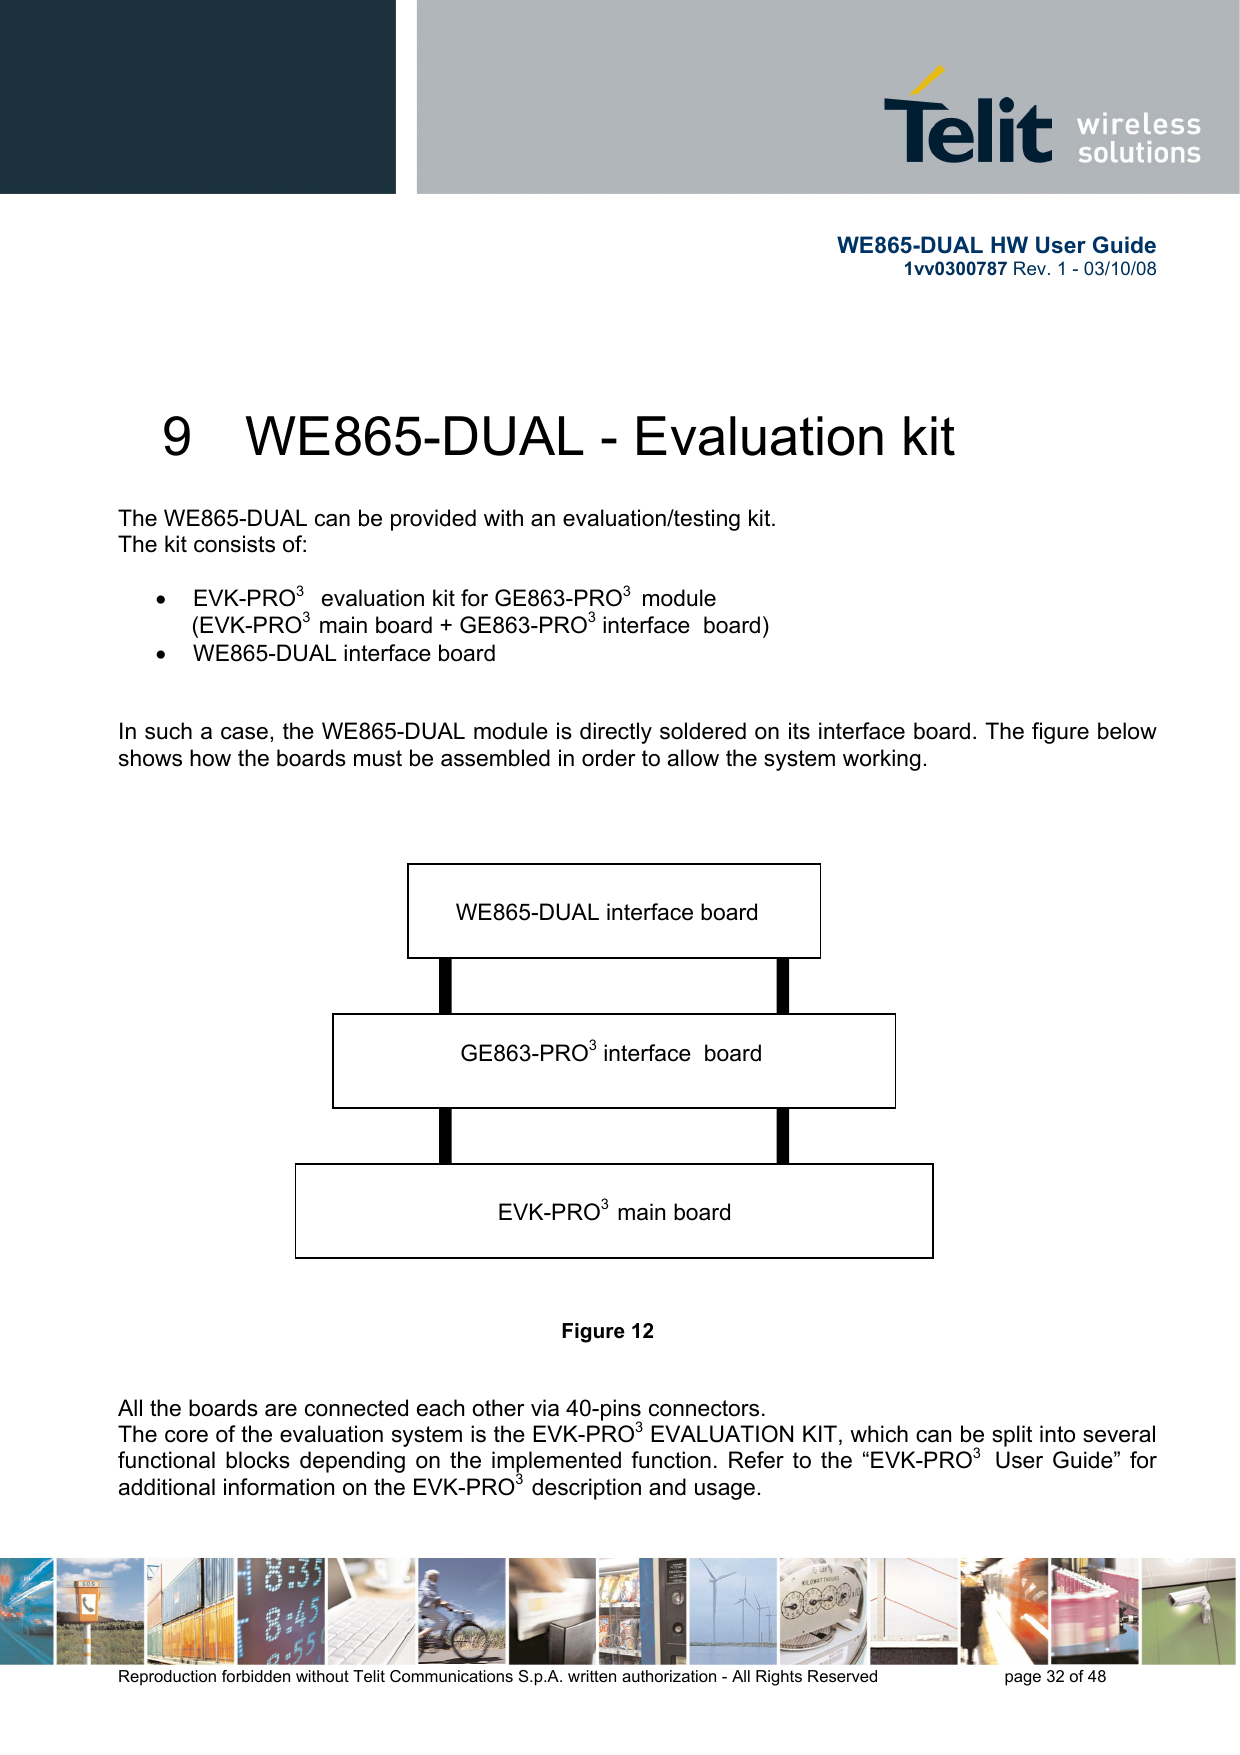       WE865-DUAL HW User Guide 1vv0300787 Rev. 1 - 03/10/08      Reproduction forbidden without Telit Communications S.p.A. written authorization - All Rights Reserved    page 32 of 48  9  WE865-DUAL - Evaluation kit  The WE865-DUAL can be provided with an evaluation/testing kit.  The kit consists of:  • EVK-PRO3   evaluation kit for GE863-PRO3  module  (EVK-PRO3  main board + GE863-PRO3 interface  board) •  WE865-DUAL interface board     In such a case, the WE865-DUAL module is directly soldered on its interface board. The figure below shows how the boards must be assembled in order to allow the system working.                            Figure 12   All the boards are connected each other via 40-pins connectors. The core of the evaluation system is the EVK-PRO3 EVALUATION KIT, which can be split into several functional blocks depending on the implemented function. Refer to the “EVK-PRO3  User Guide” for additional information on the EVK-PRO3  description and usage. EVK-PRO3  main boardGE863-PRO3 interface  board WE865-DUAL interface board 